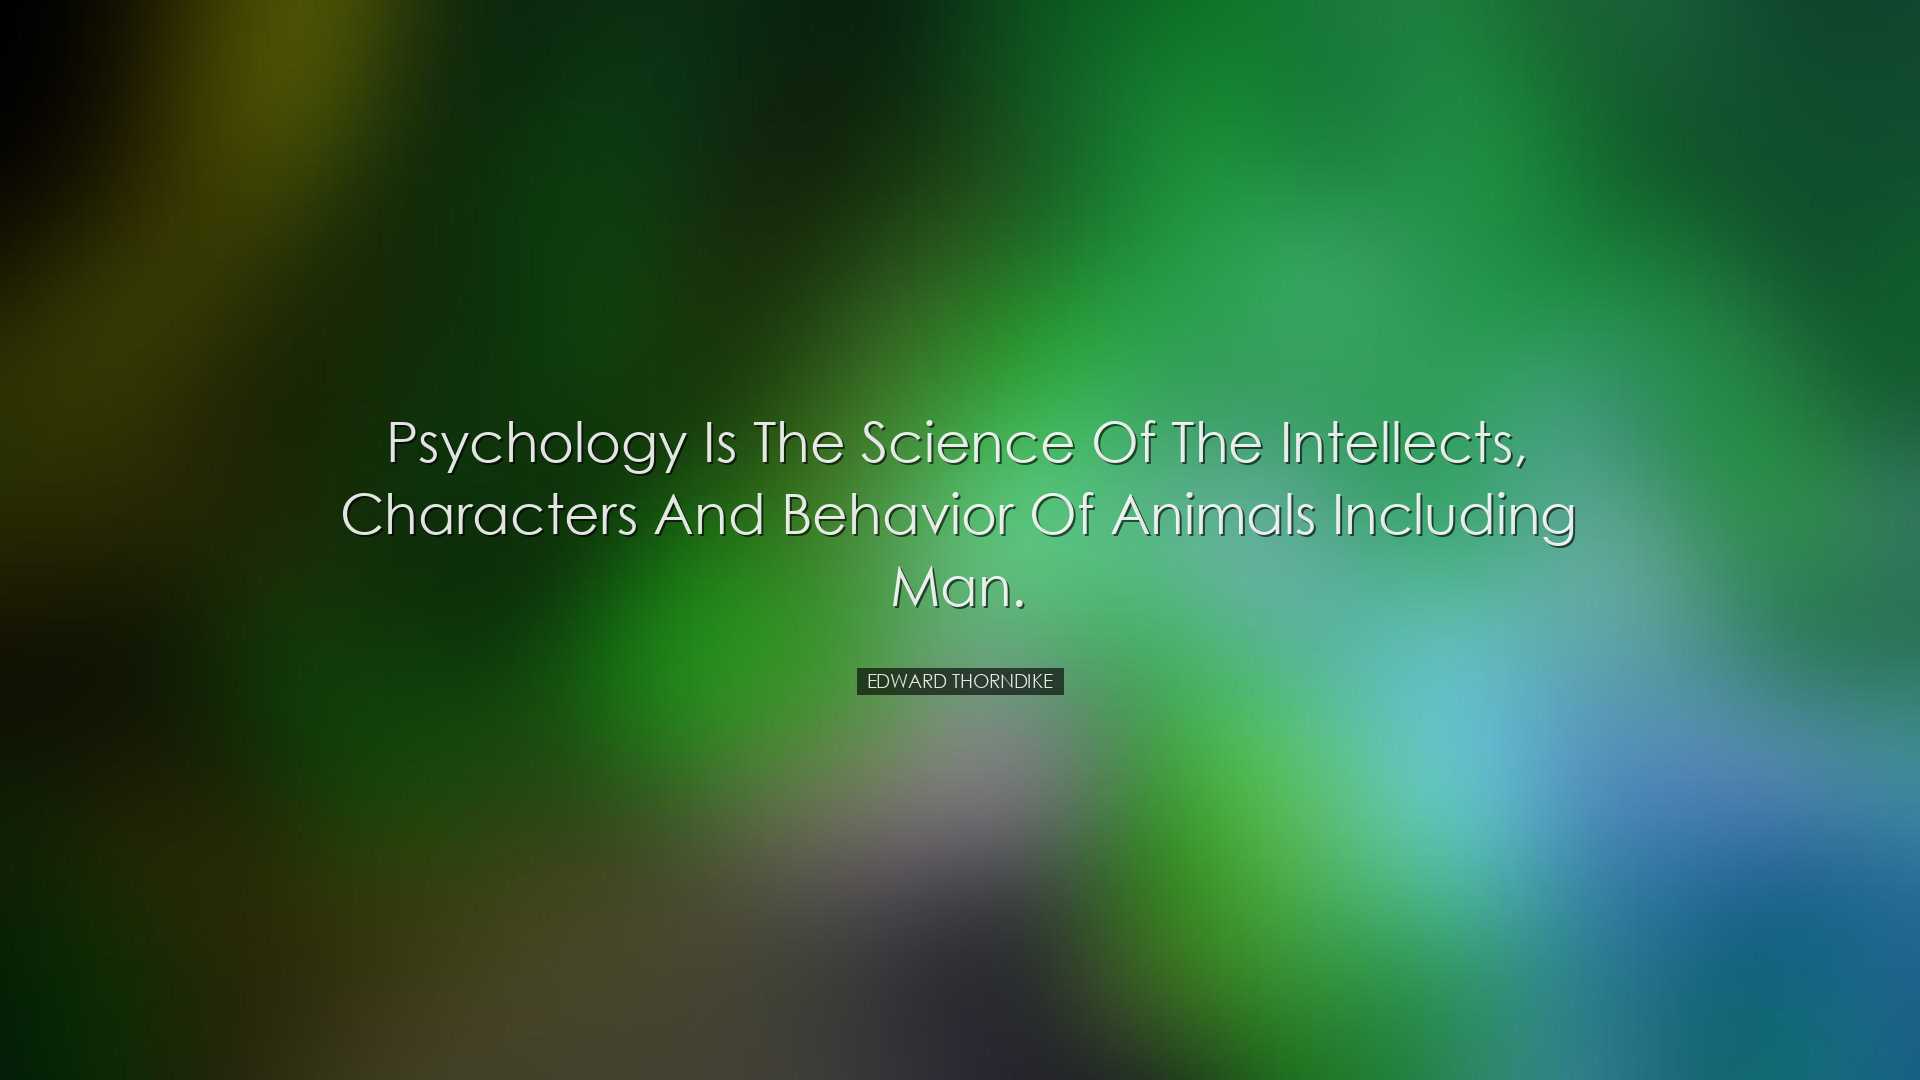 Psychology is the science of the intellects, characters and behavi